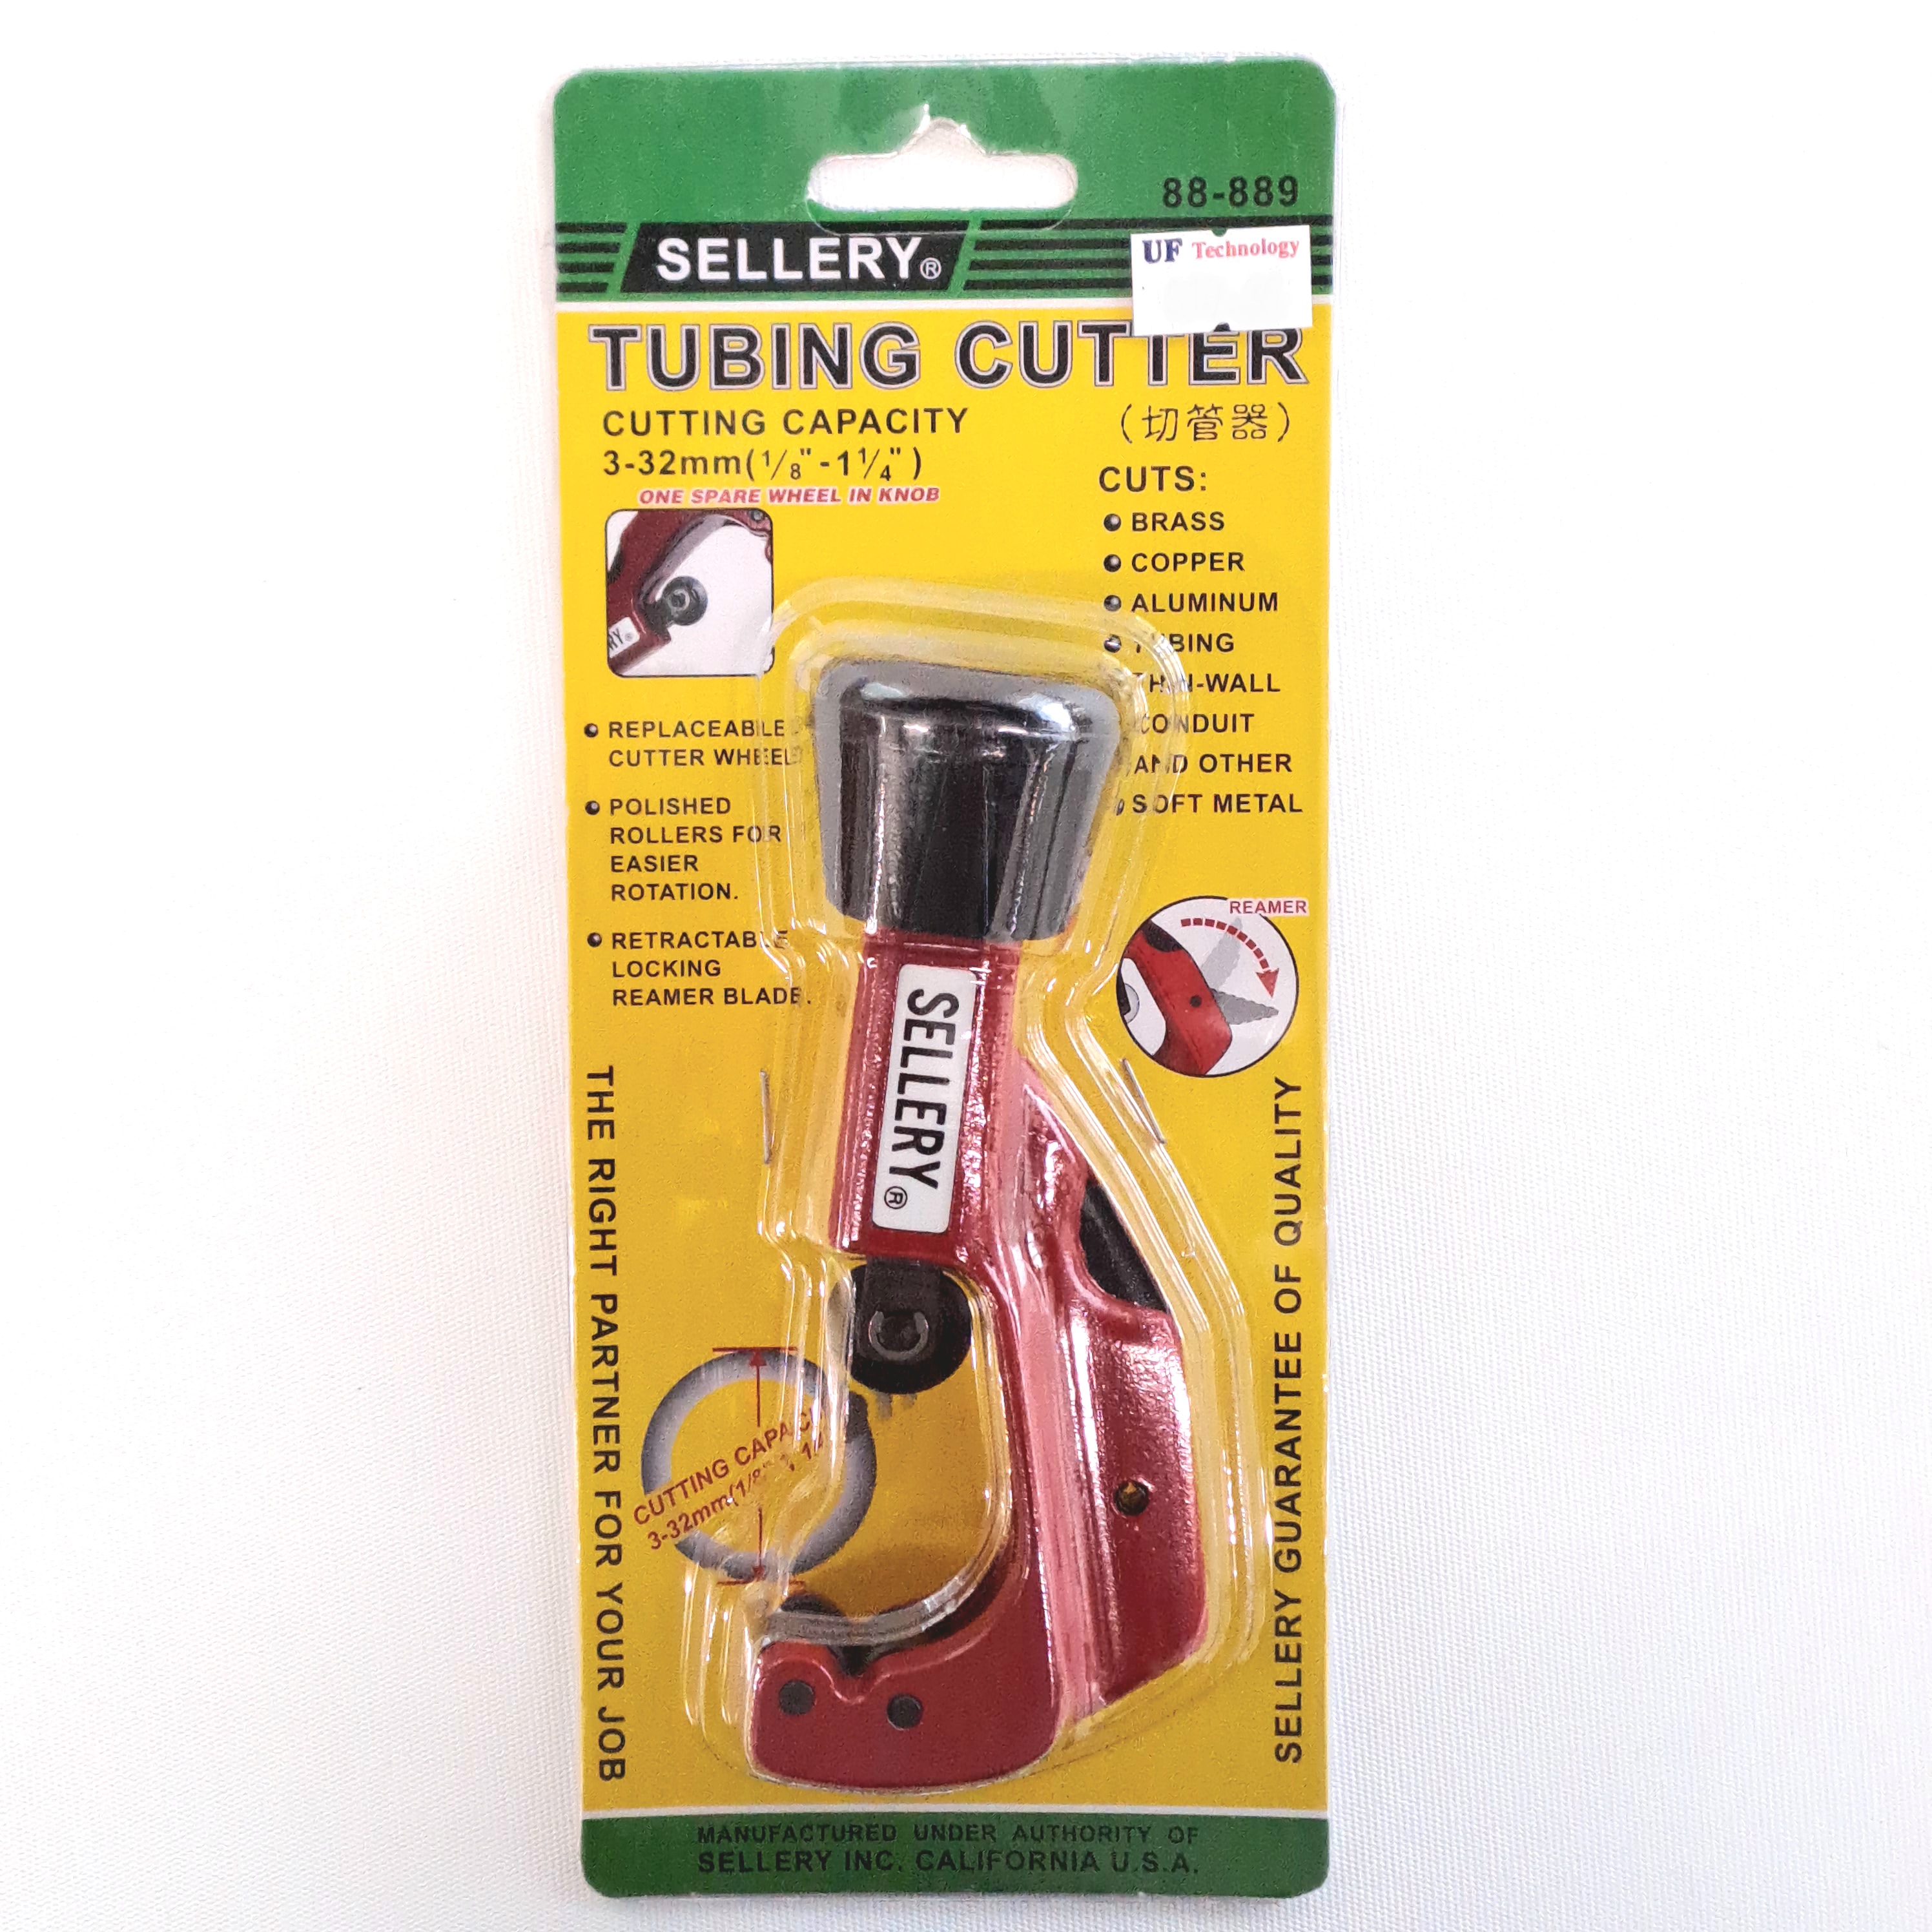 Sellery 88-889 Tubing Cutter, Cutting capacity: 1/8-1 1/4